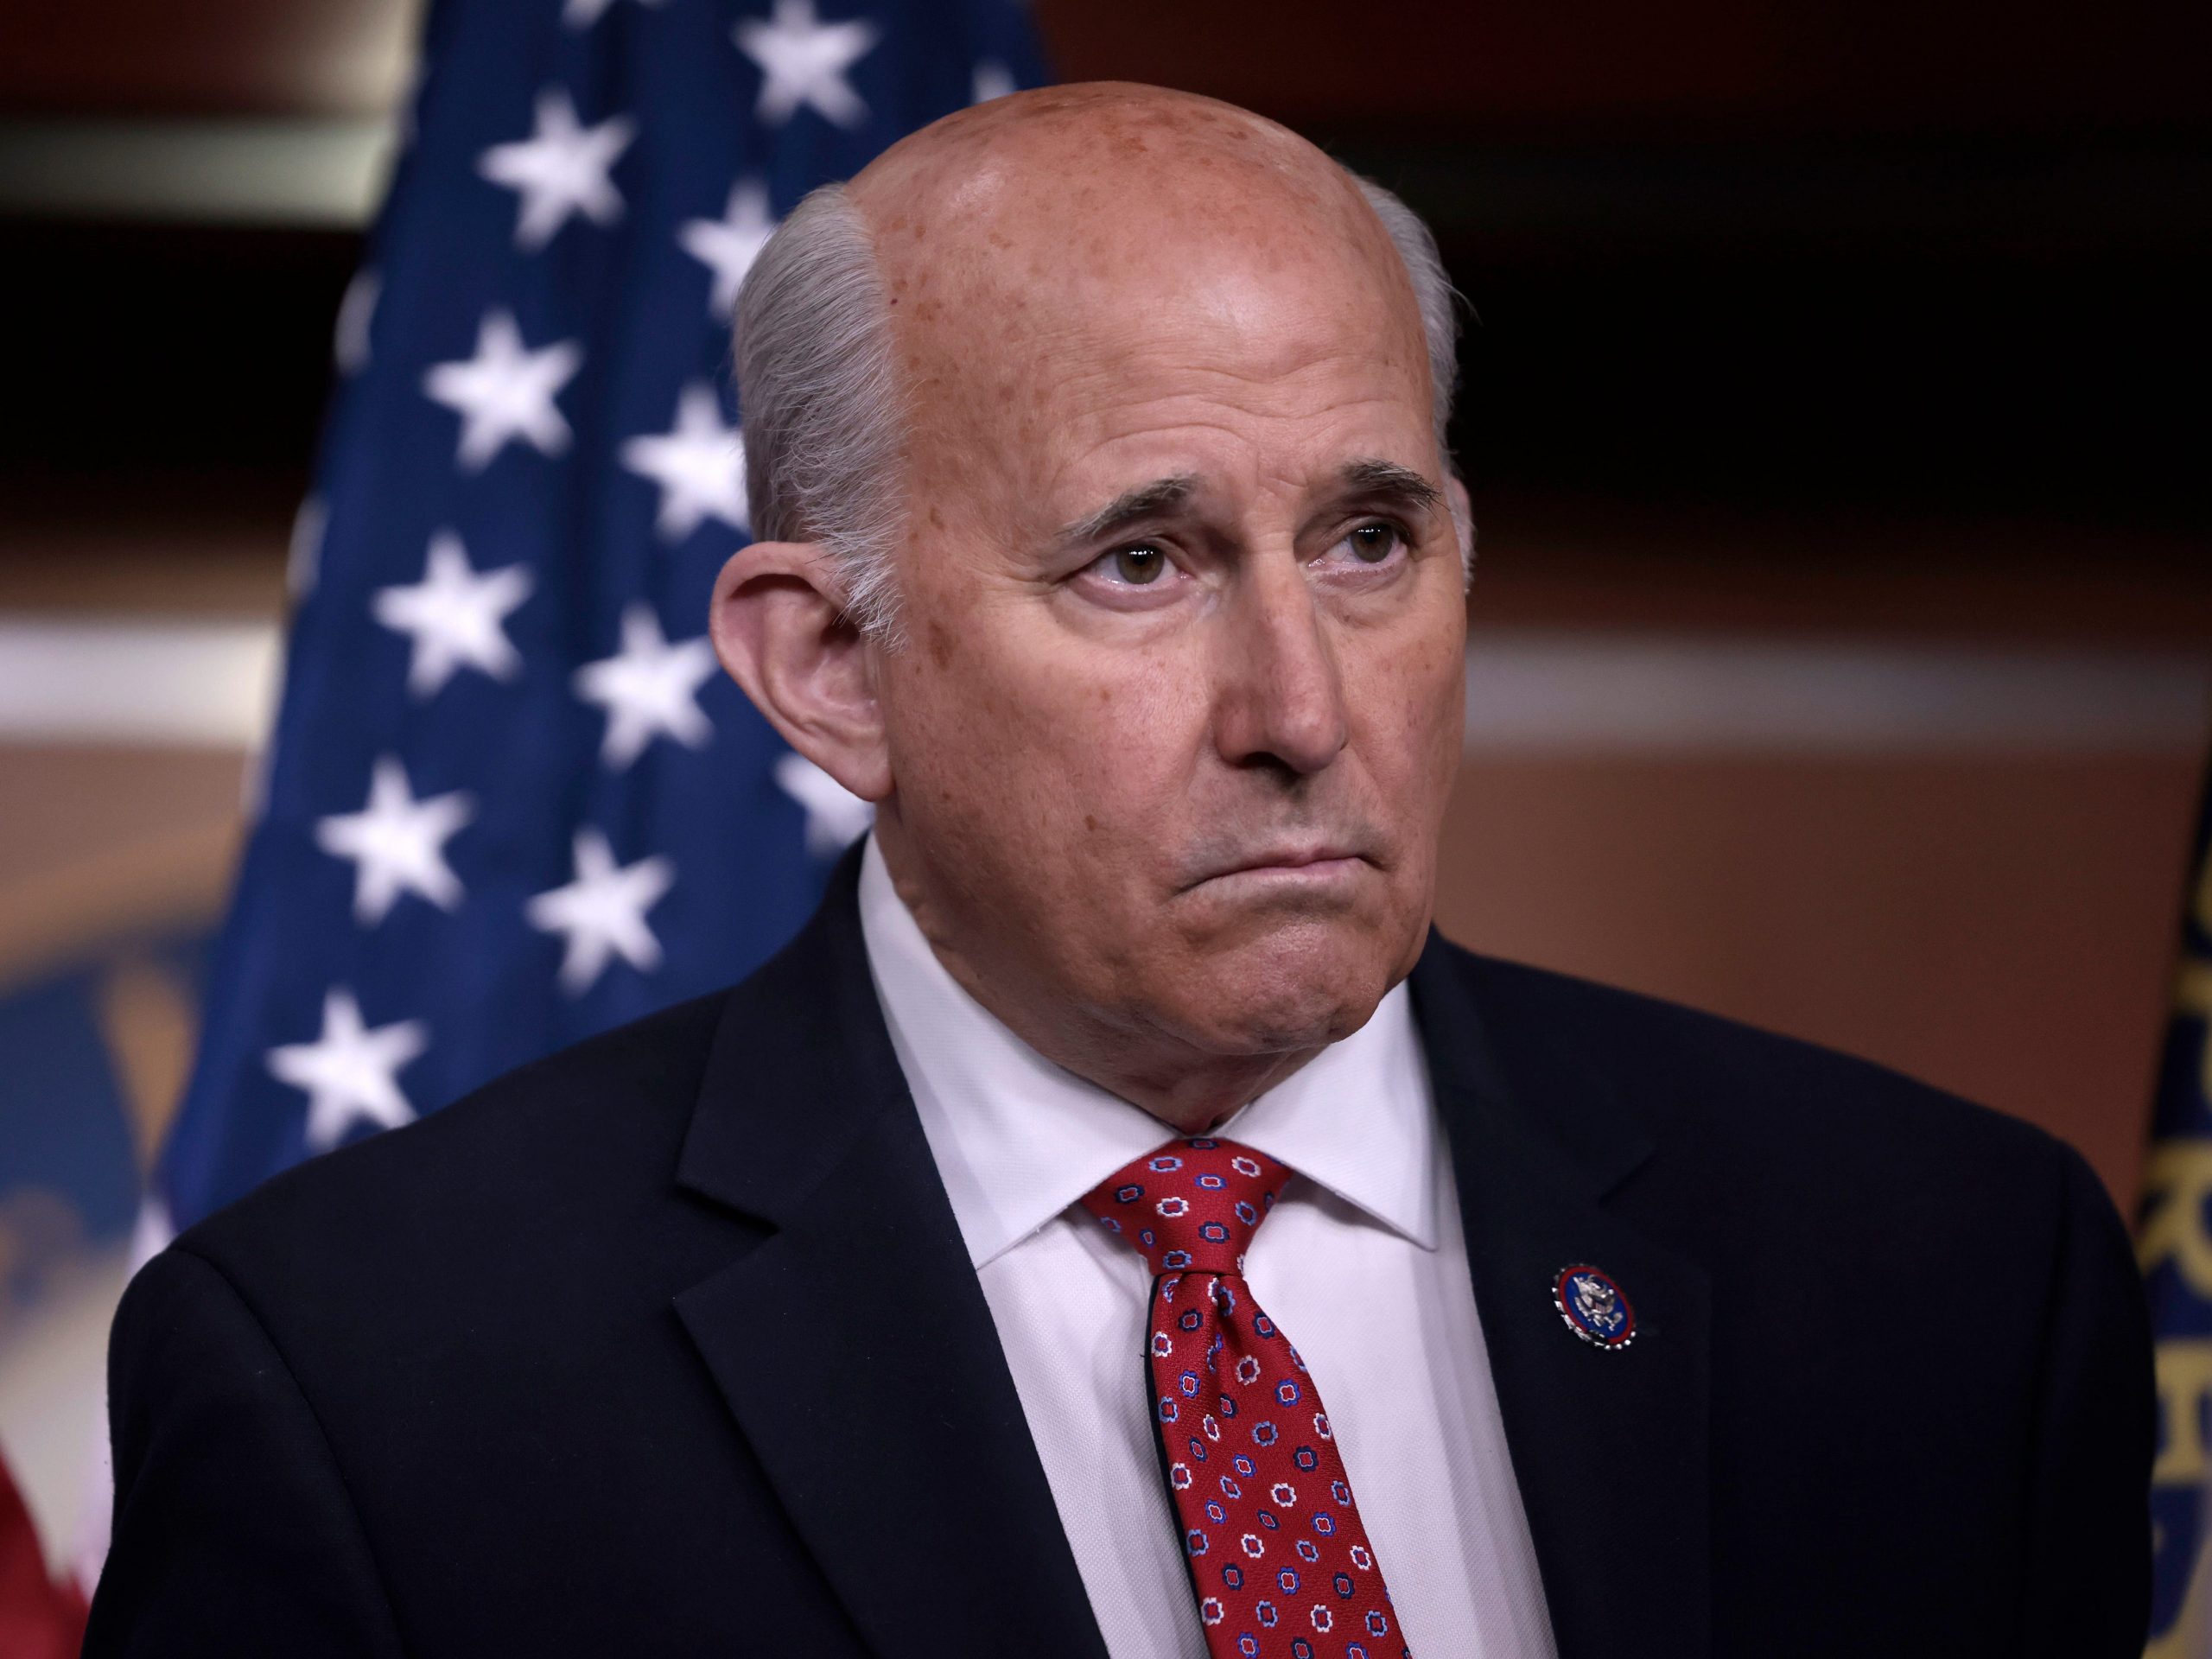 U.S. Rep. Louie Gohmert, R-Texas, listens during a news conference at the Capitol Building on December 07, 2021 in Washington, DC.